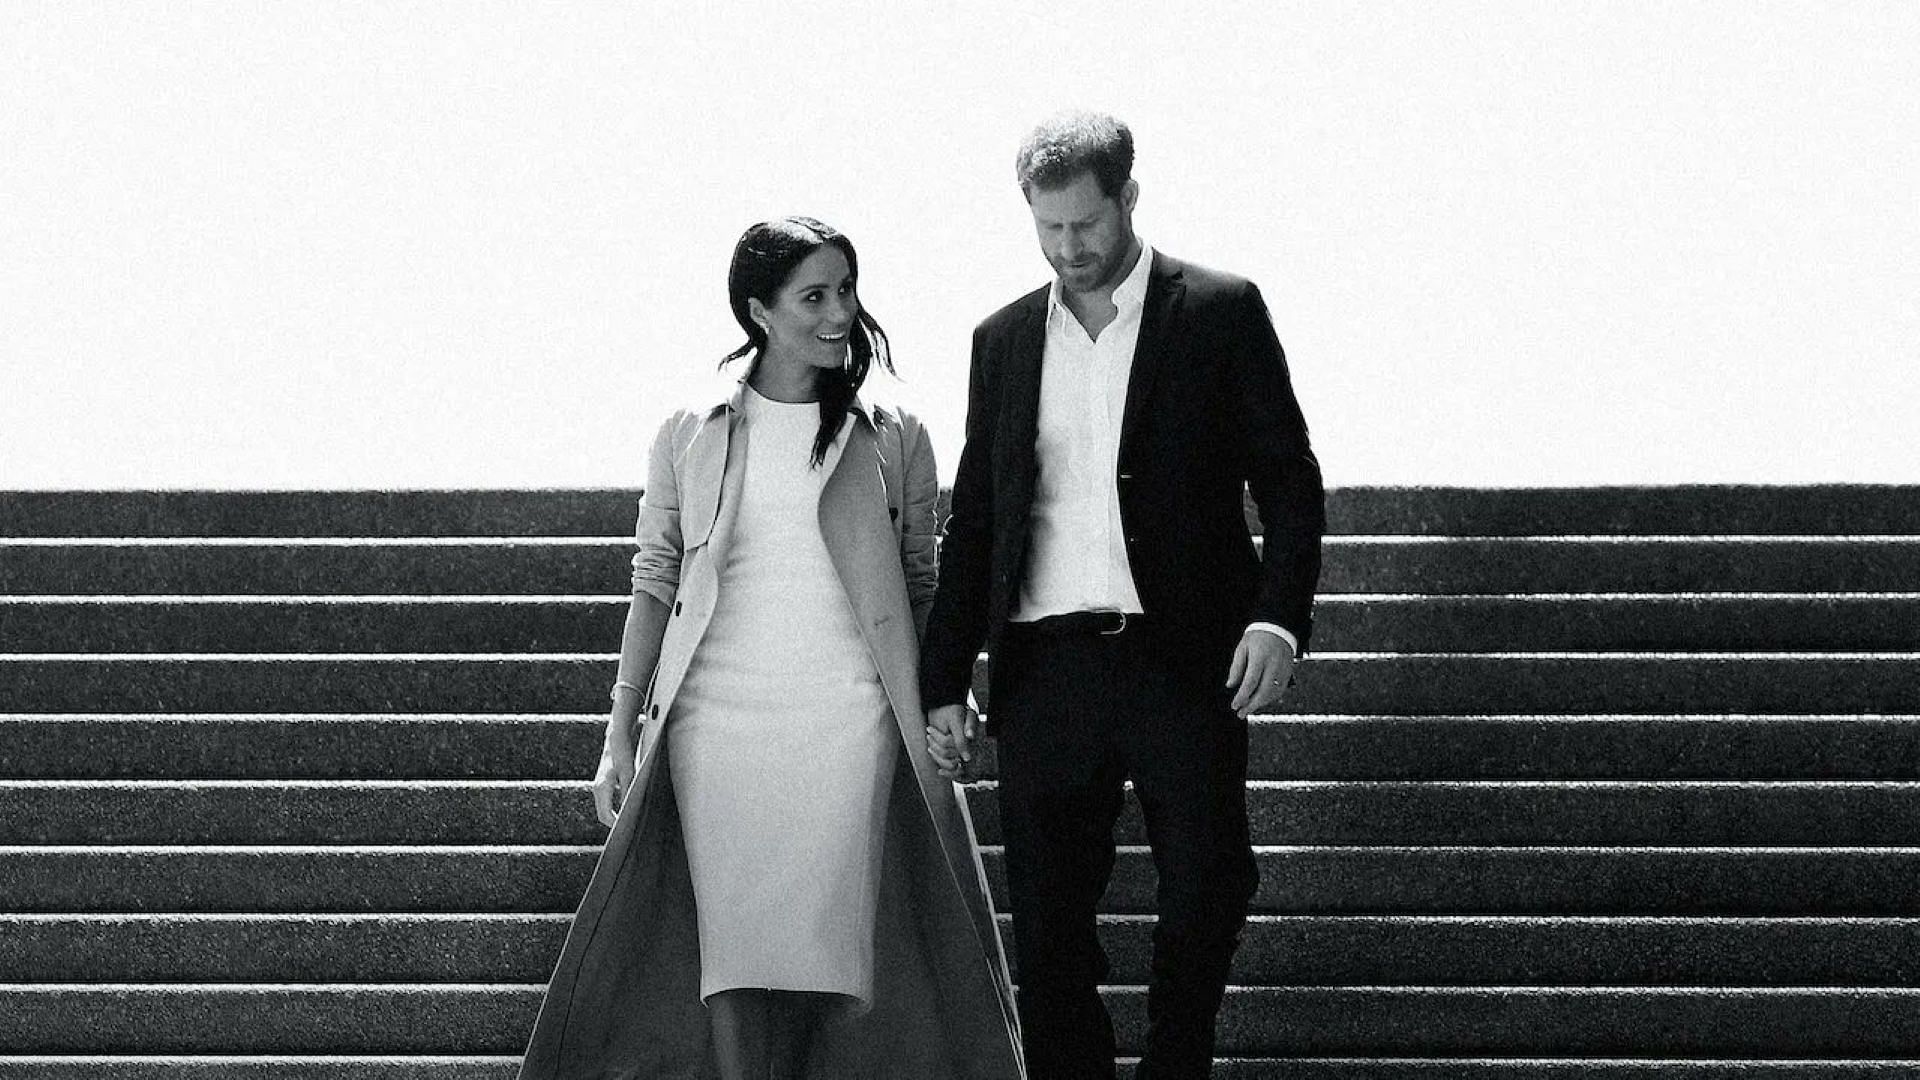 A still from Harry and Meghan (Image via Netflix)